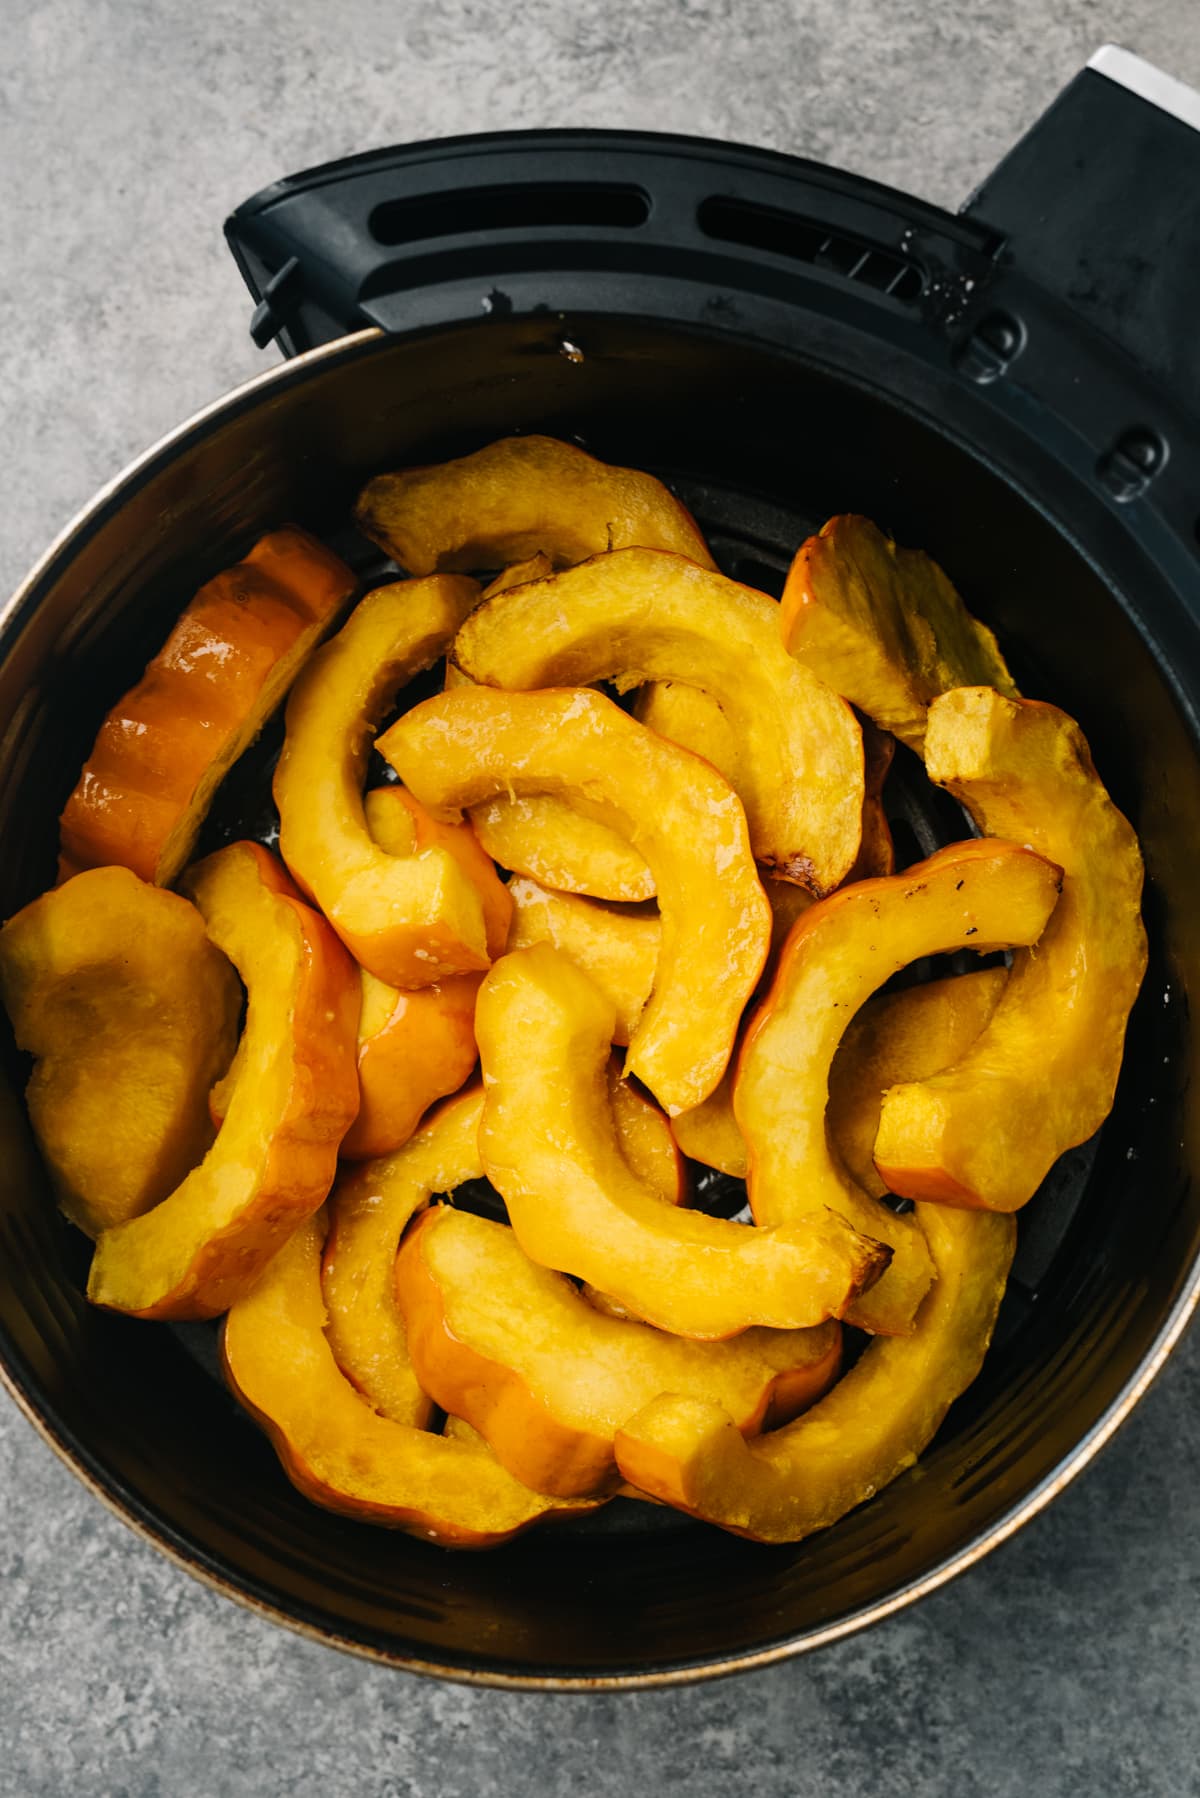 Acorn squash slices in the basket of an air fryer halfway through cooking.